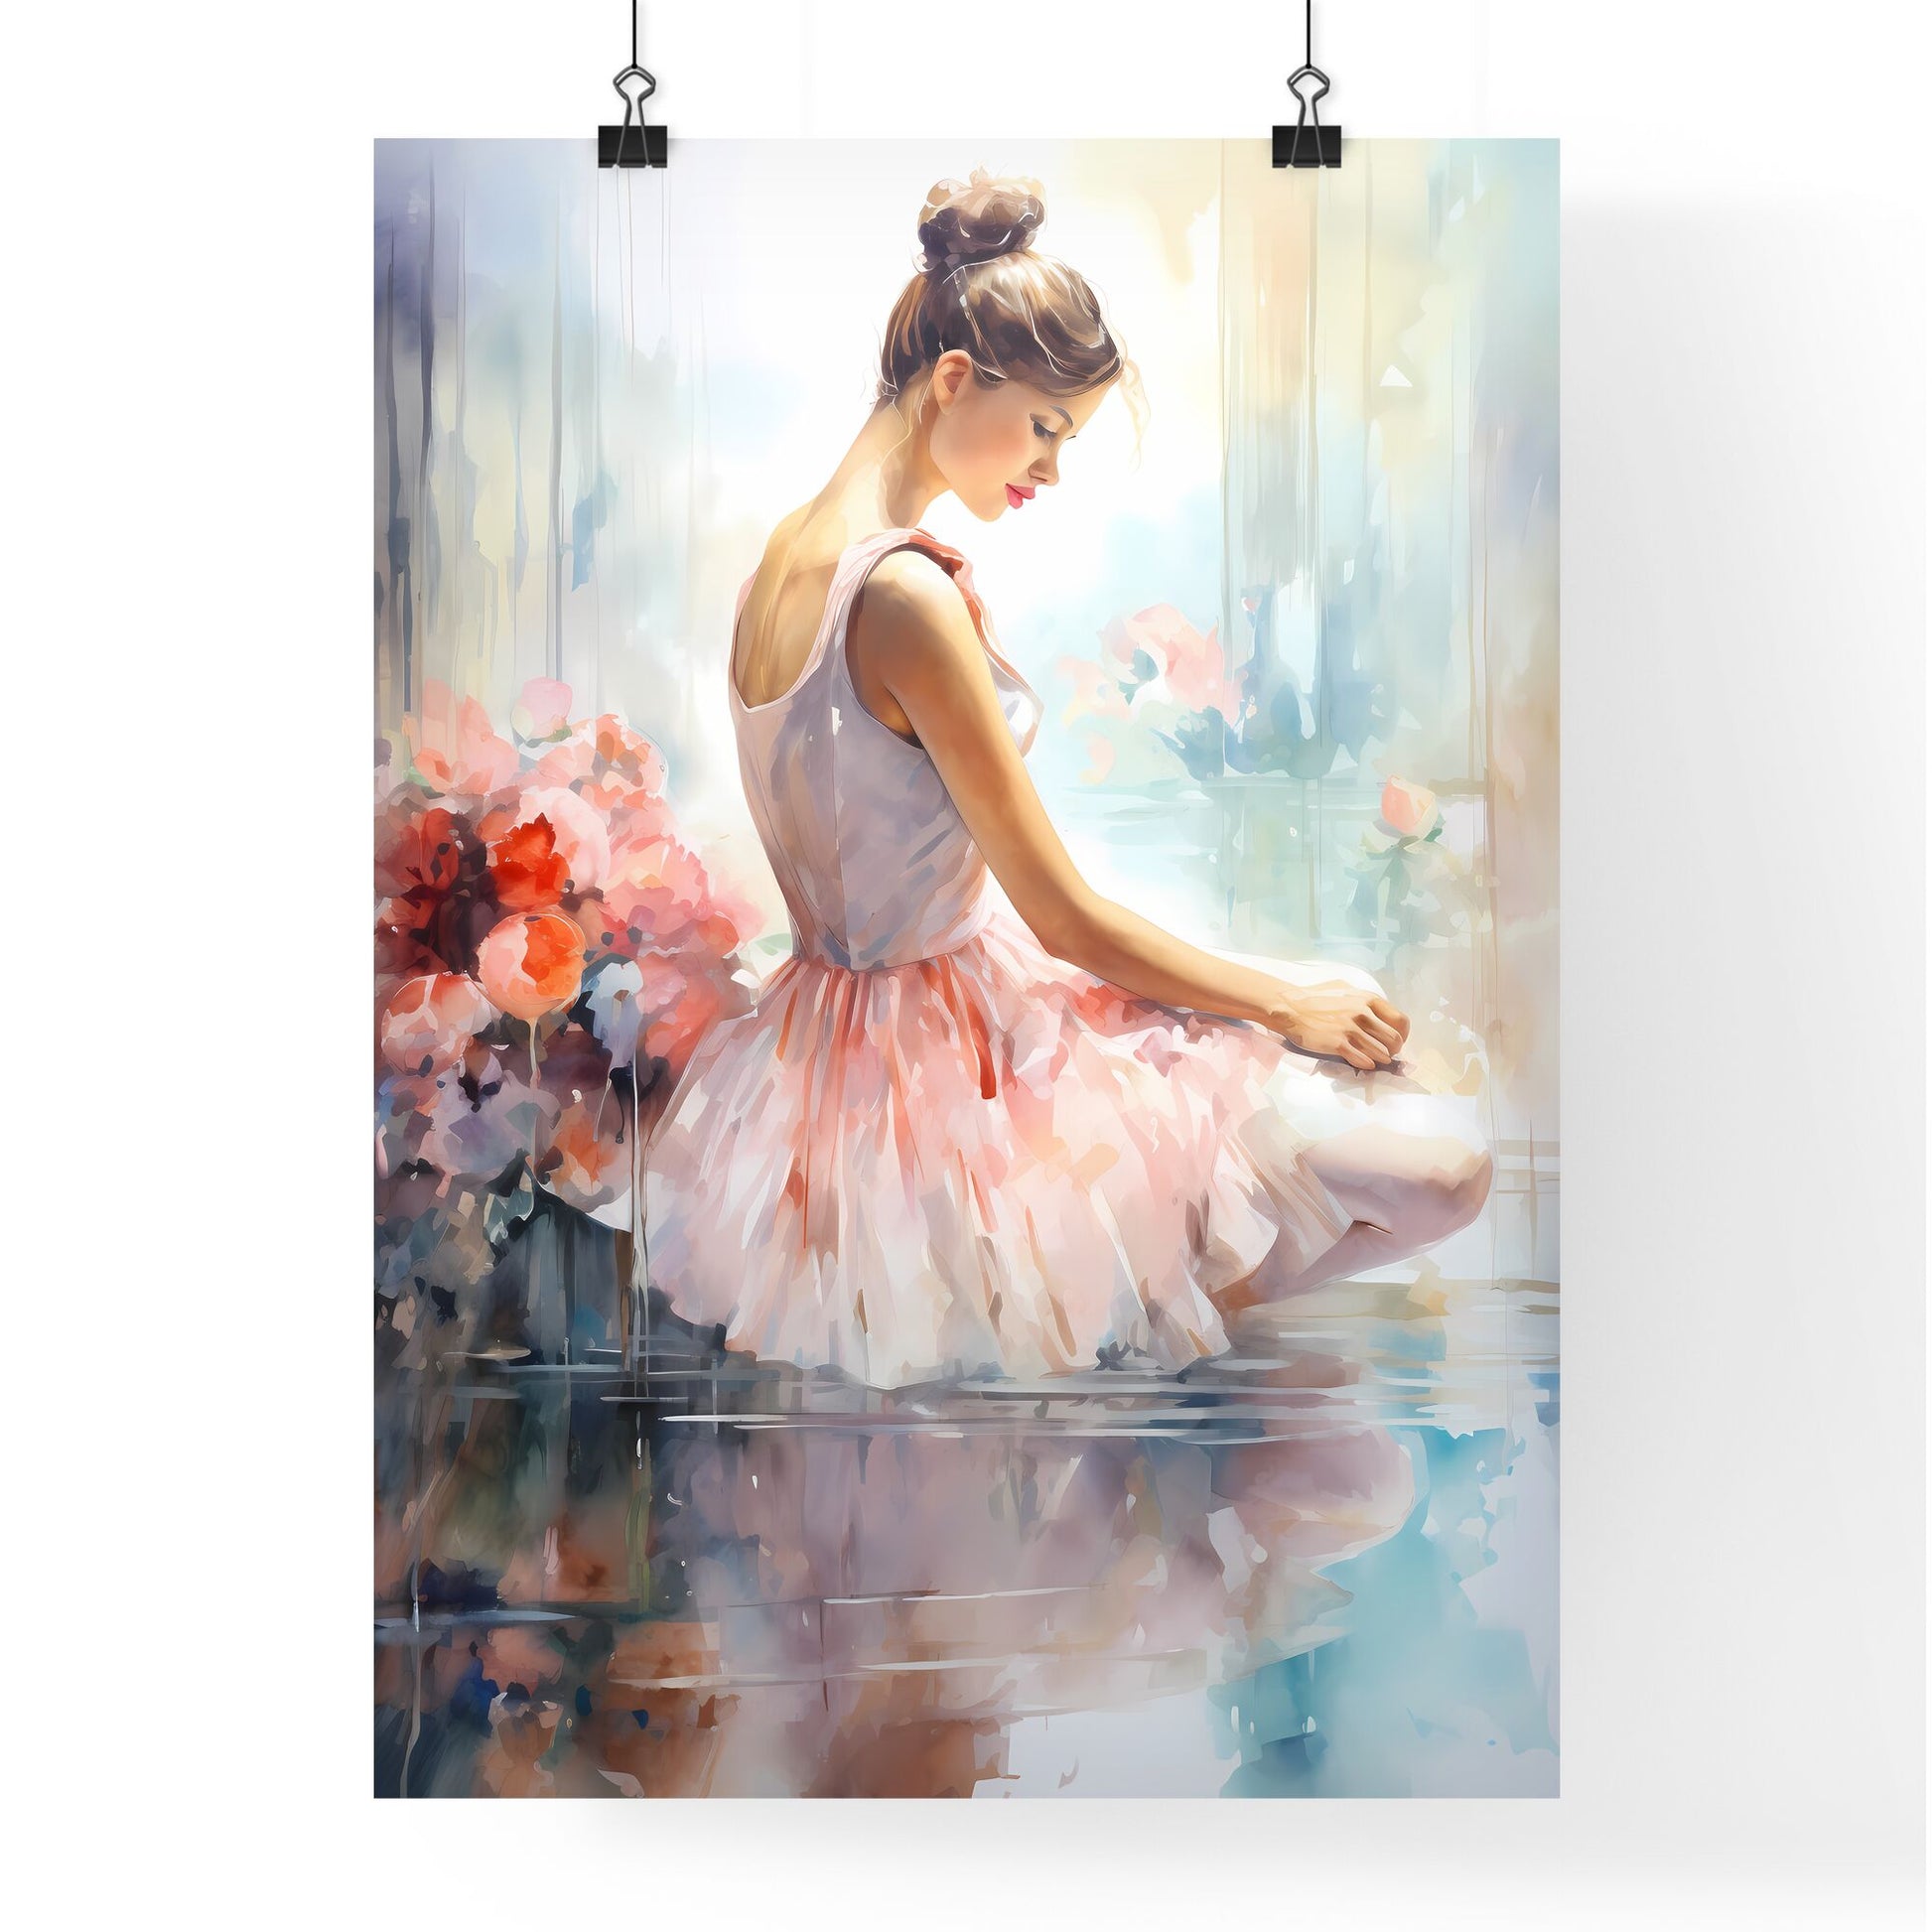 Watercolor Of A Woman In A Pink Dress Sitting On A Floor Art Print Default Title